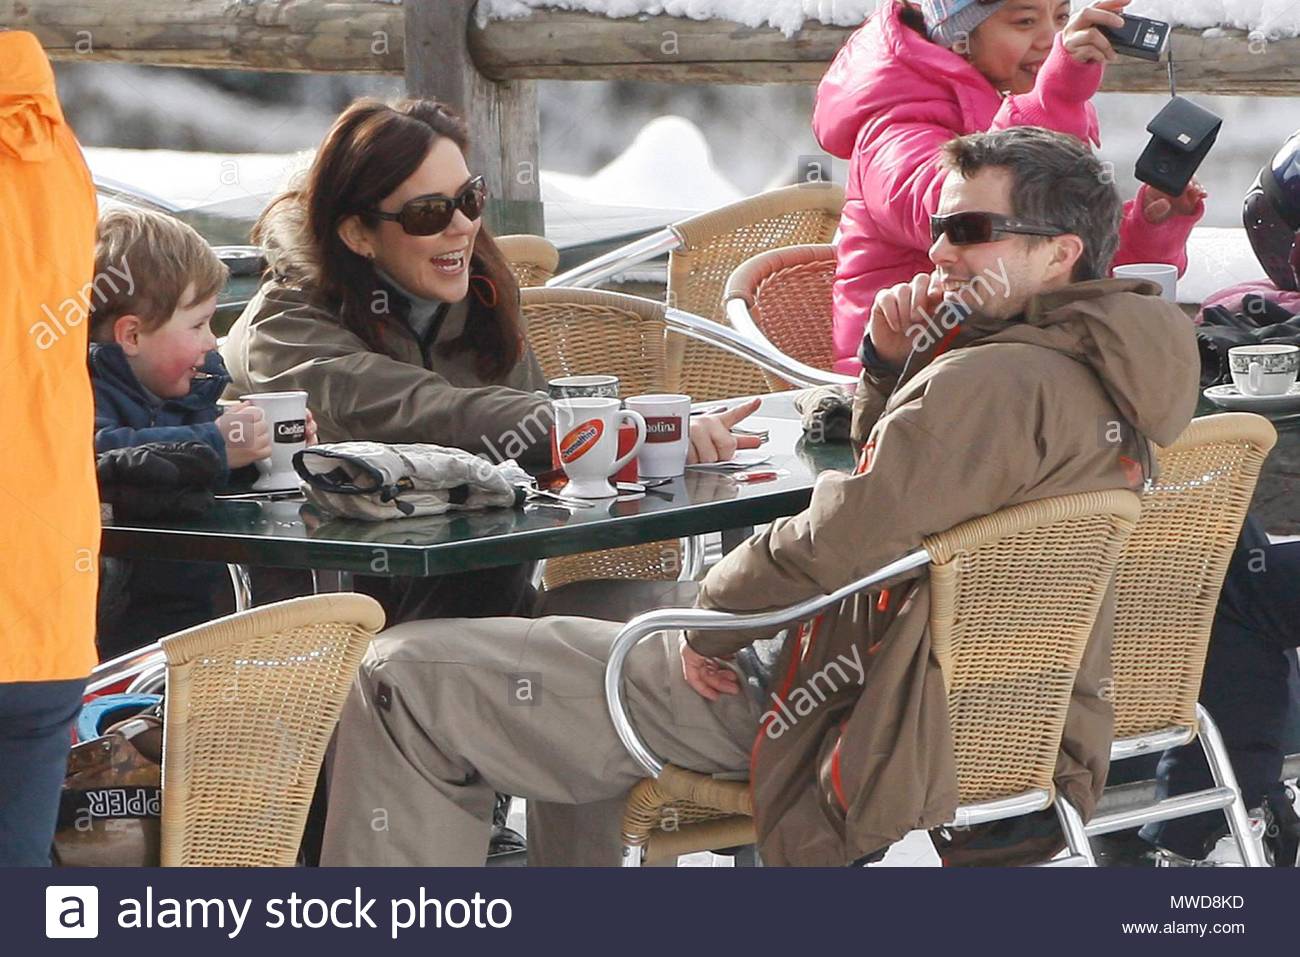 hrh-crown-princess-mary-prince-frederik-and-kids-candid-images-of-hrh-crown-princess-mary-mary-donaldson-from-the-years-2002-2012-code-03392-photo-kaspar-wenstrup-all-over-press-denmark-MWD8KD.jpg